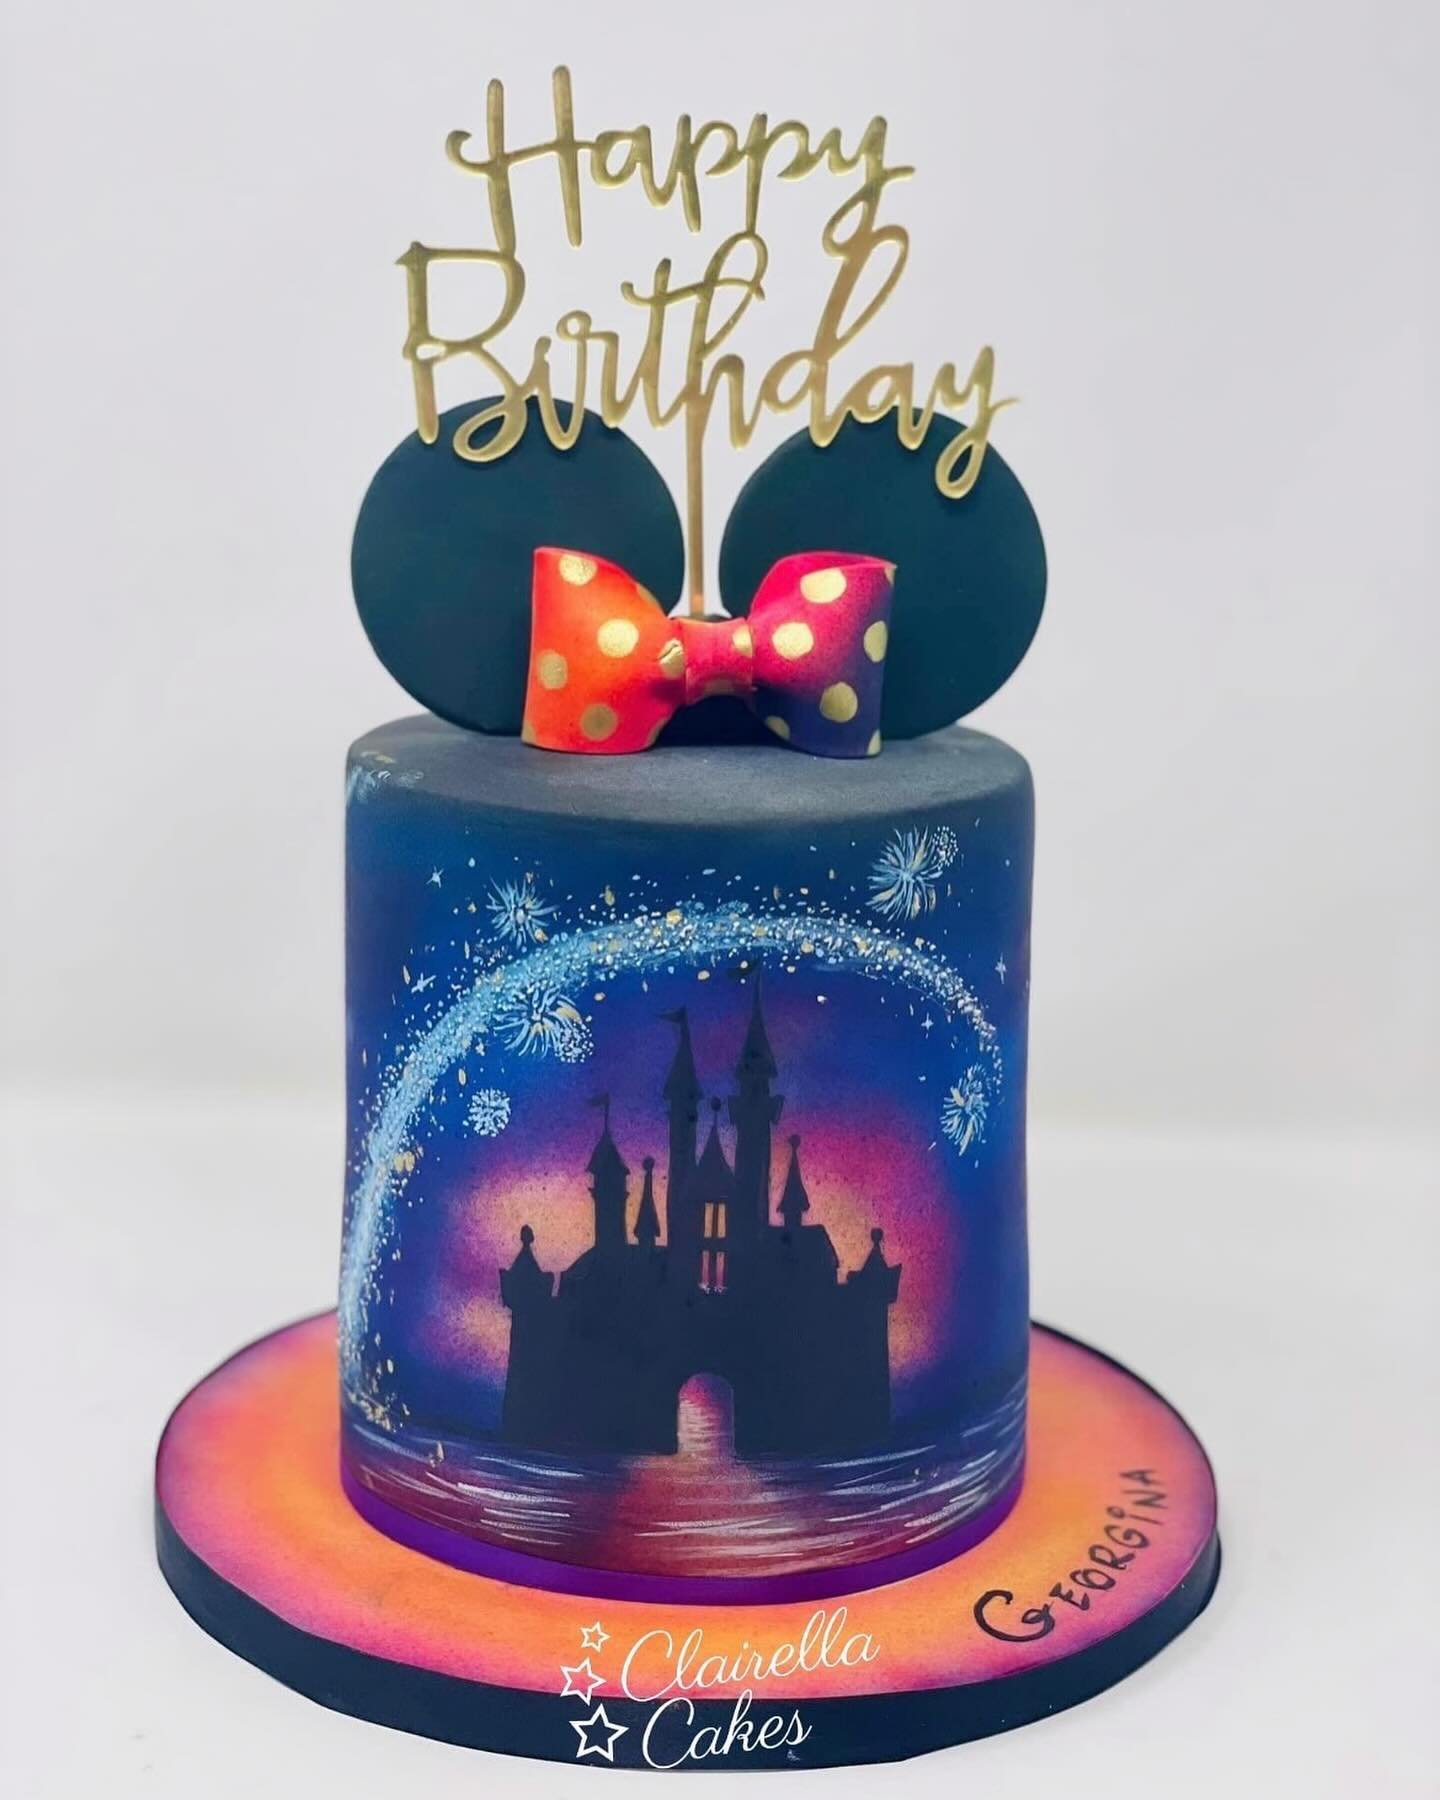 When you wish upon a star! 💫✨
A Magical Disney Themed Birthday cake for a very special lady today.
Cake was airbrushed with the Clairella Cakes Airbrush &amp; handpainted with the Disney Castle silhouette. 
The cake was lemon sponge layered with van